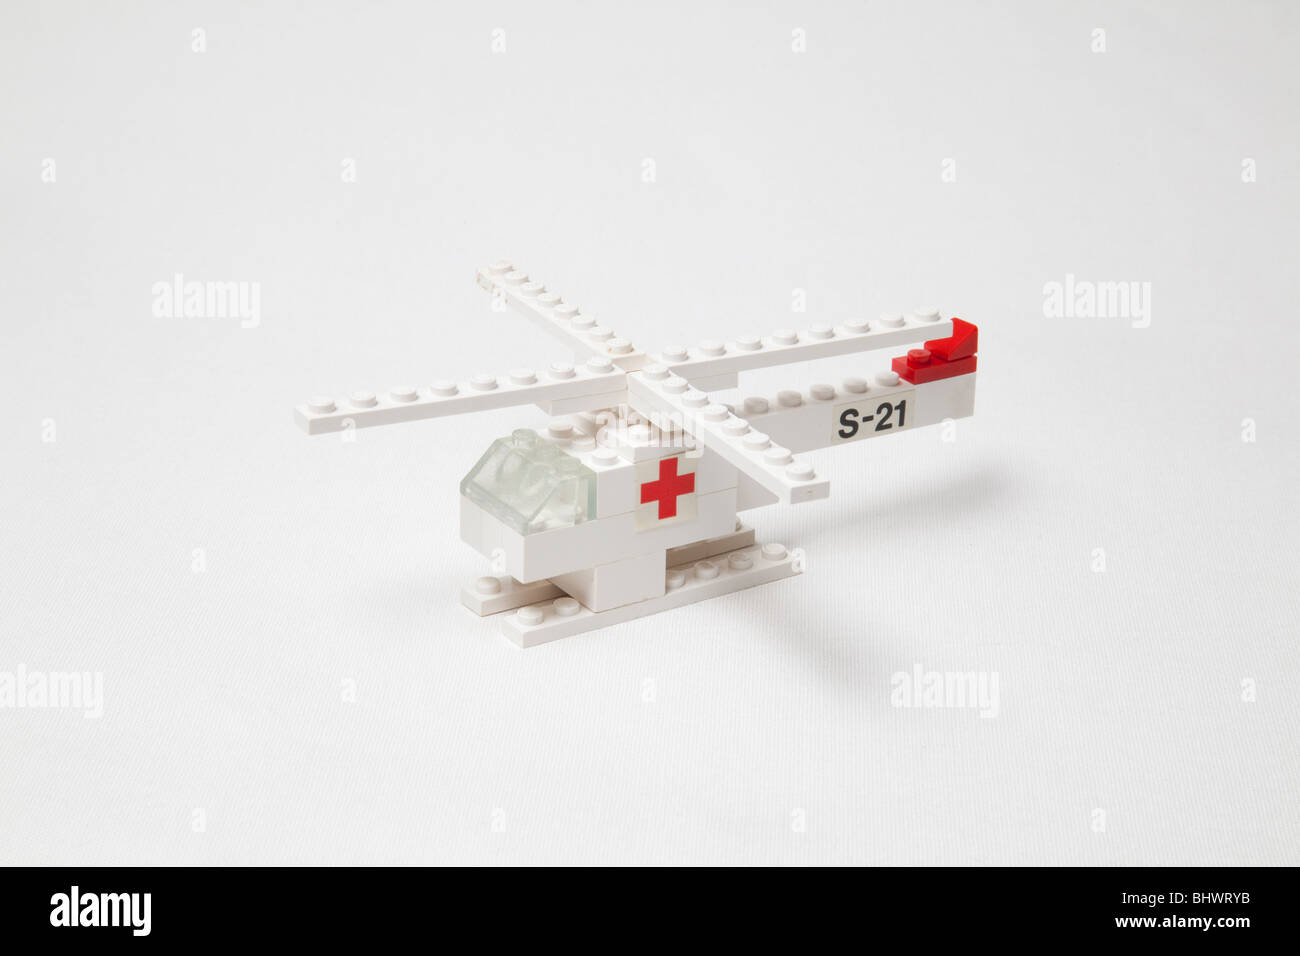 Old lego toy set rescue helicopter Stock Photo